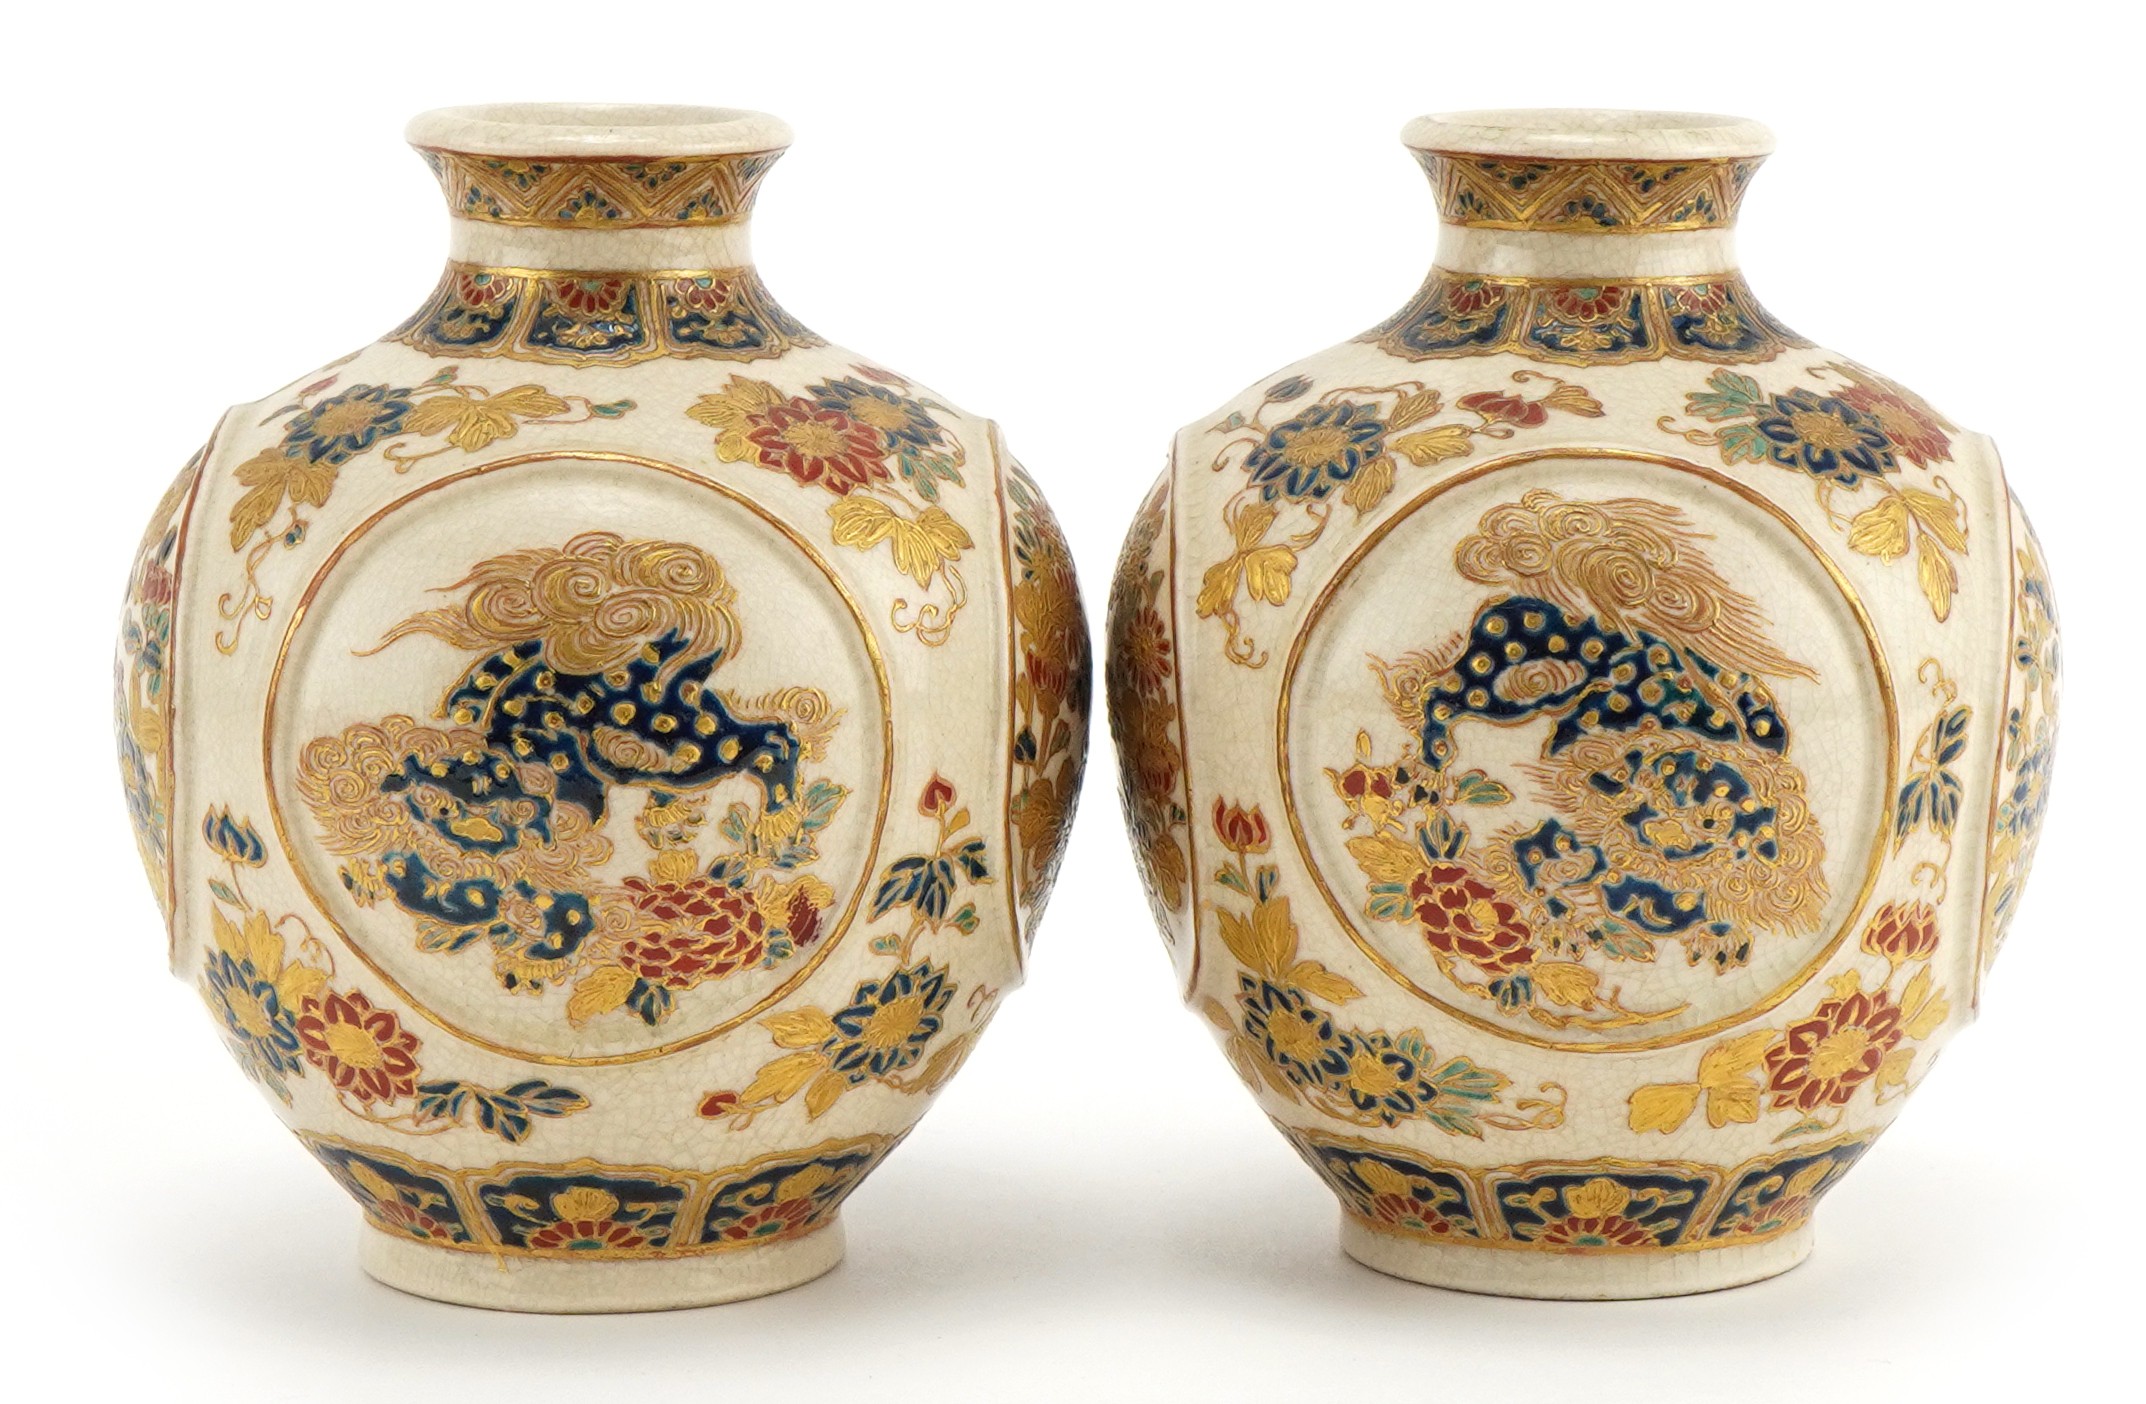 Pair of Japanese Satsuma pottery vases finely gilded with panels of dragons and flowers, character